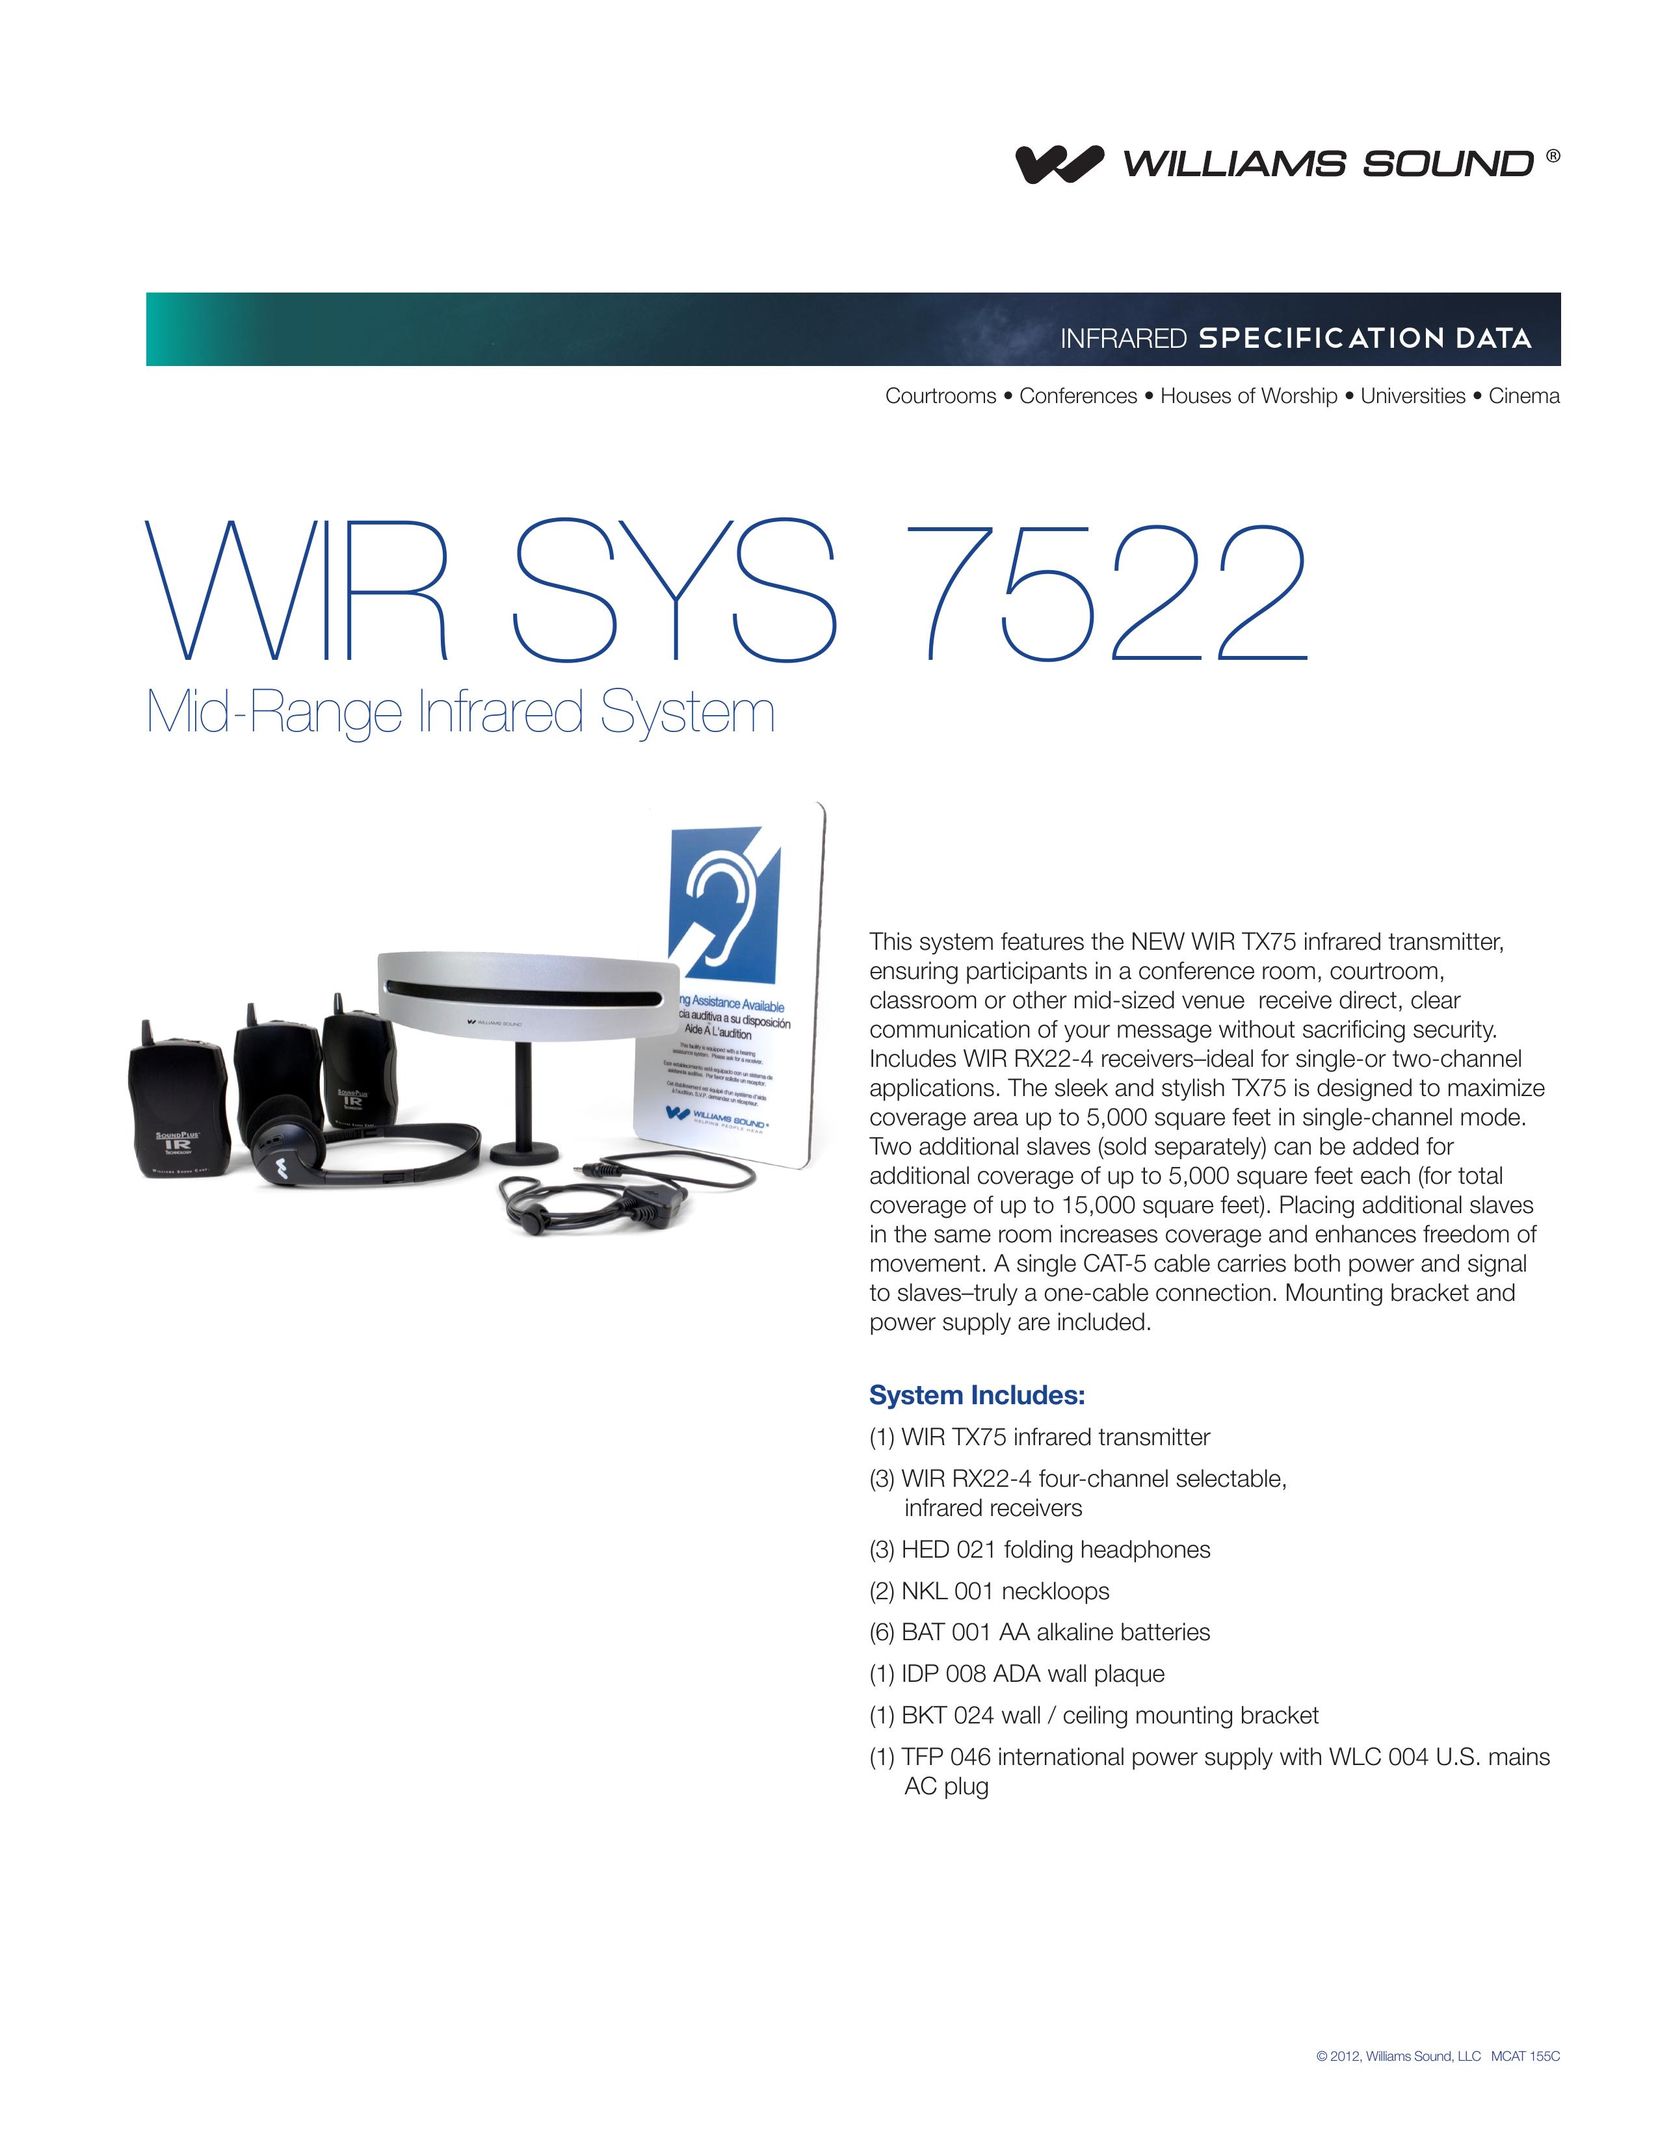 Williams Sound WIR SYS 7522 Video Game Sound System User Manual